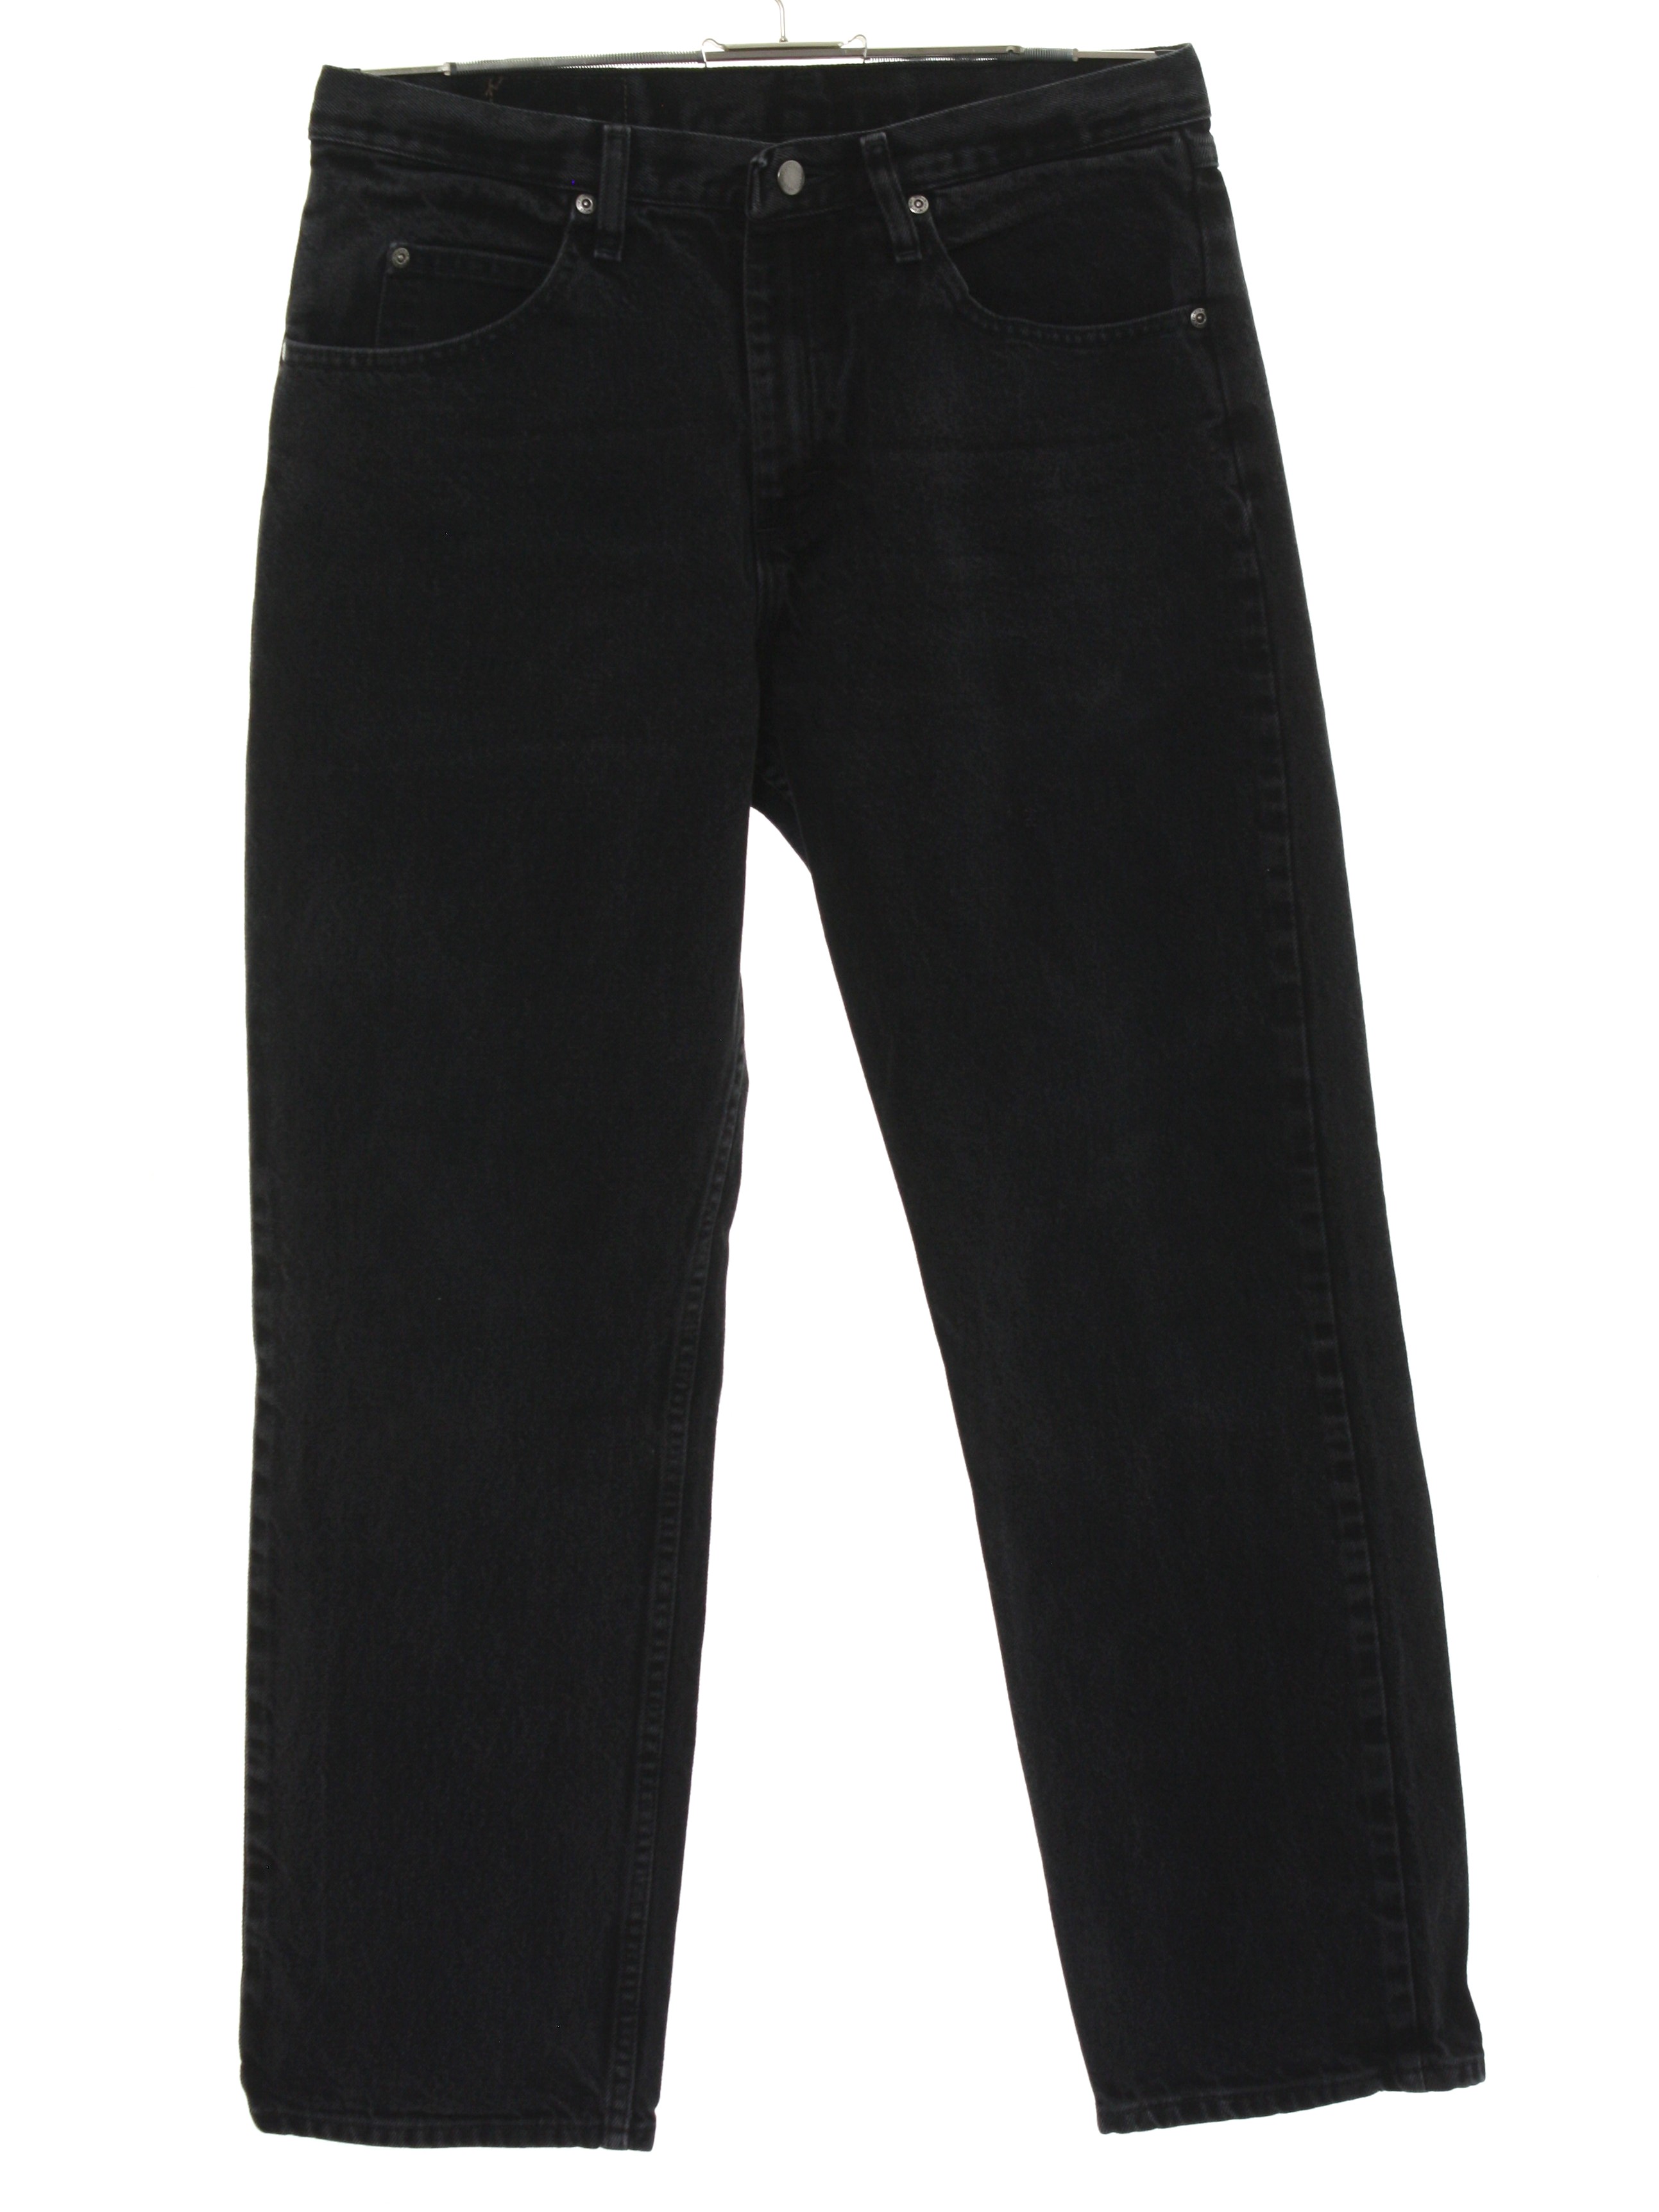 90s Retro Pants: 90s -Wrangler 97601cb- Unisex black slightly faded and  worn cotton denim tapered leg jeans pants with zipper fly closure with  button. Five pocket style - front scoop pockets with